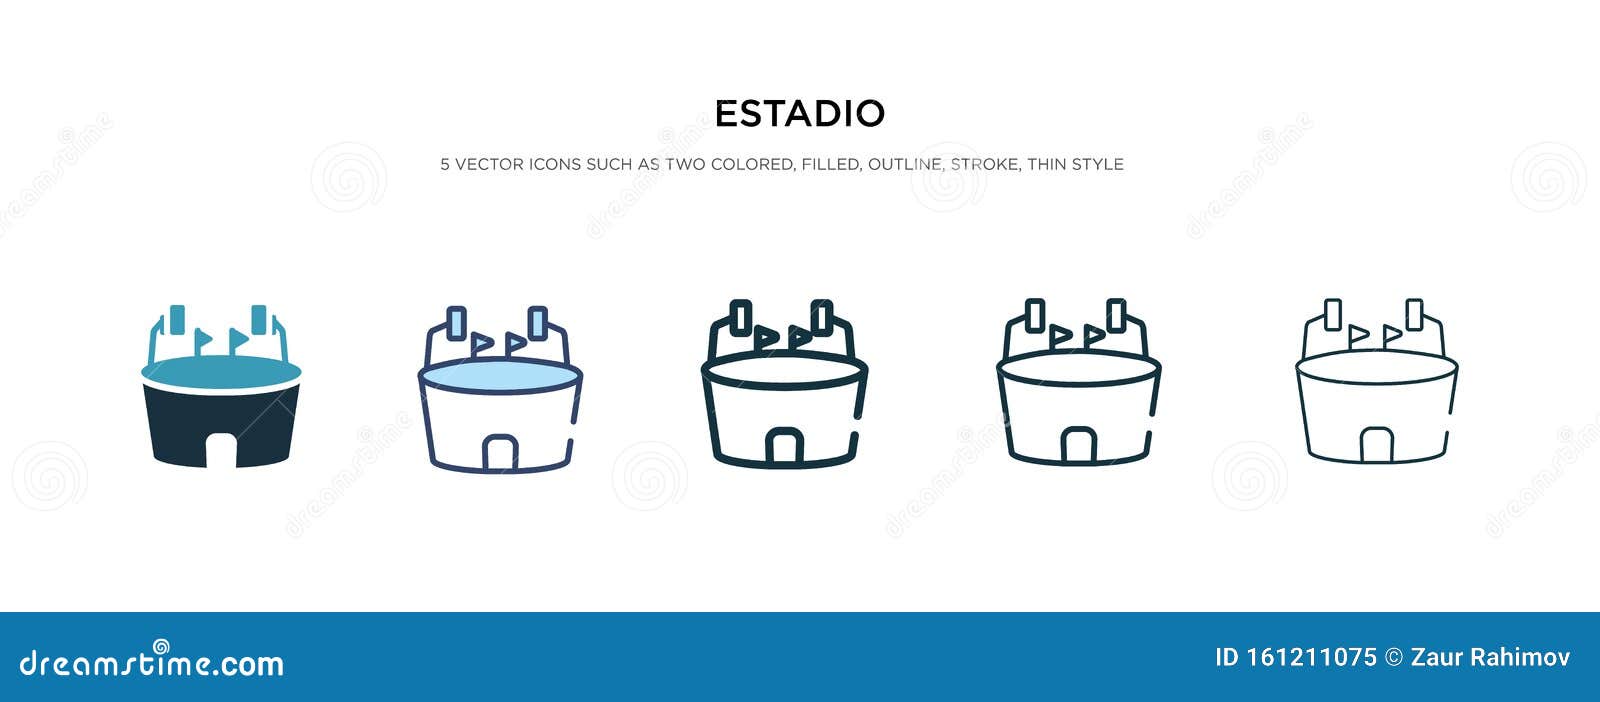 estadio icon in different style  . two colored and black estadio  icons ed in filled, outline, line